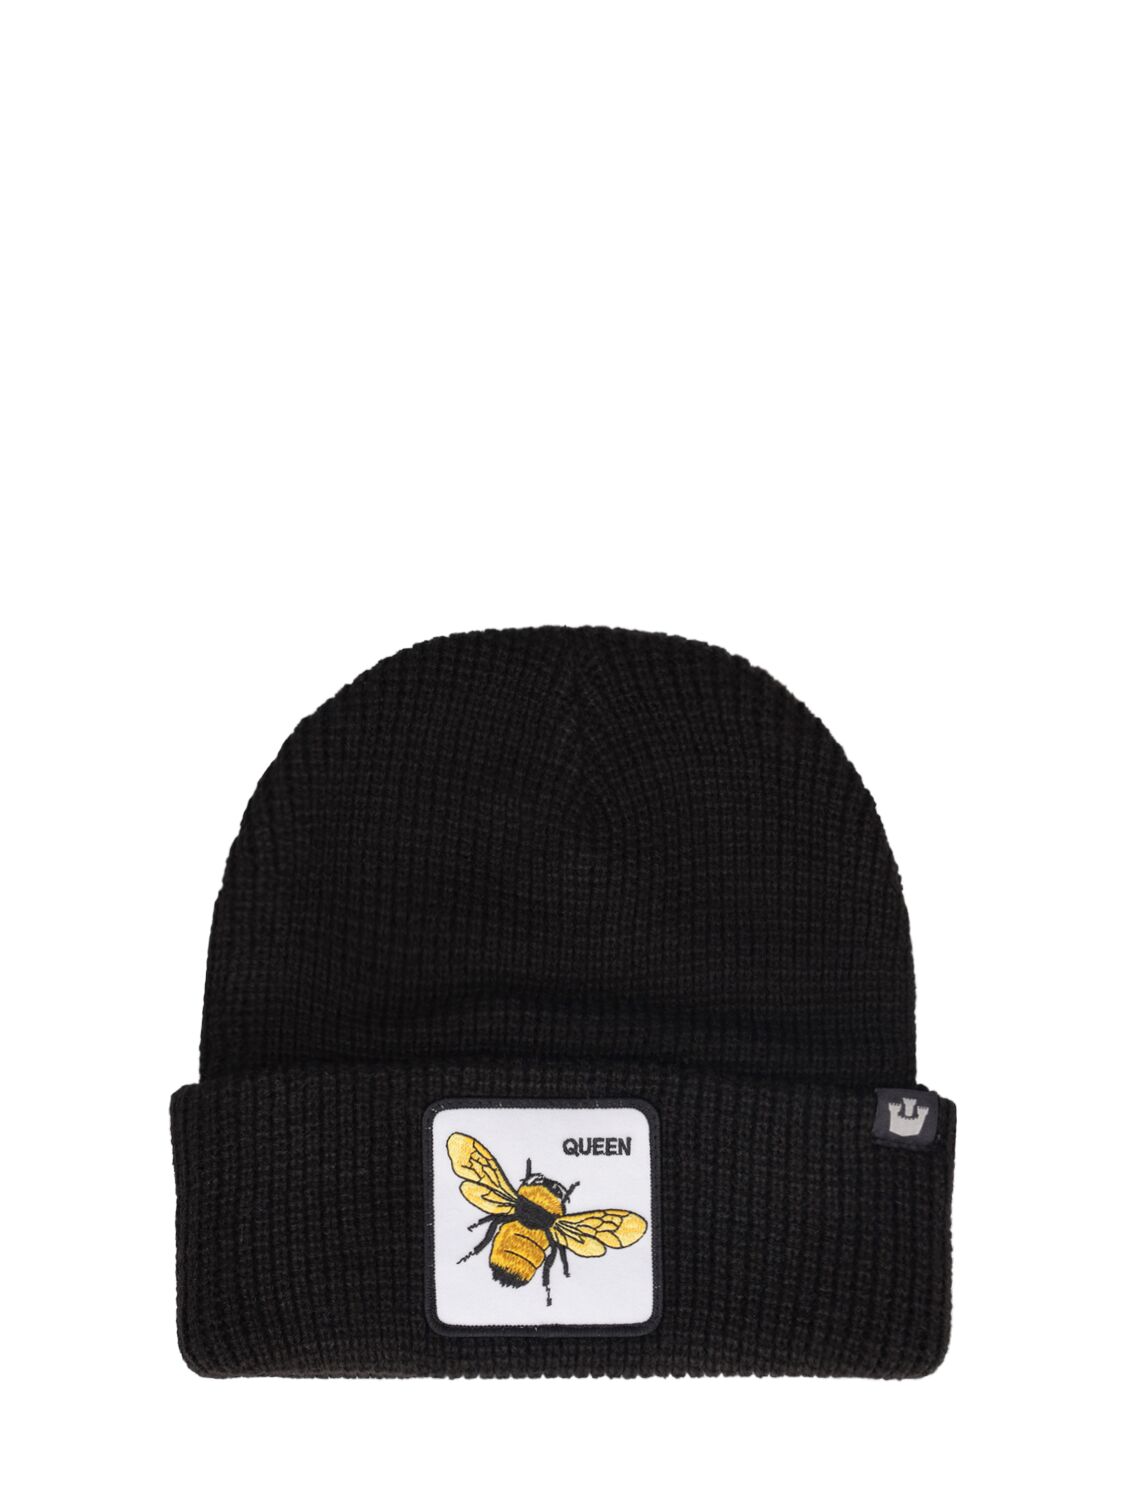 Oh Beehive Knit Beanie